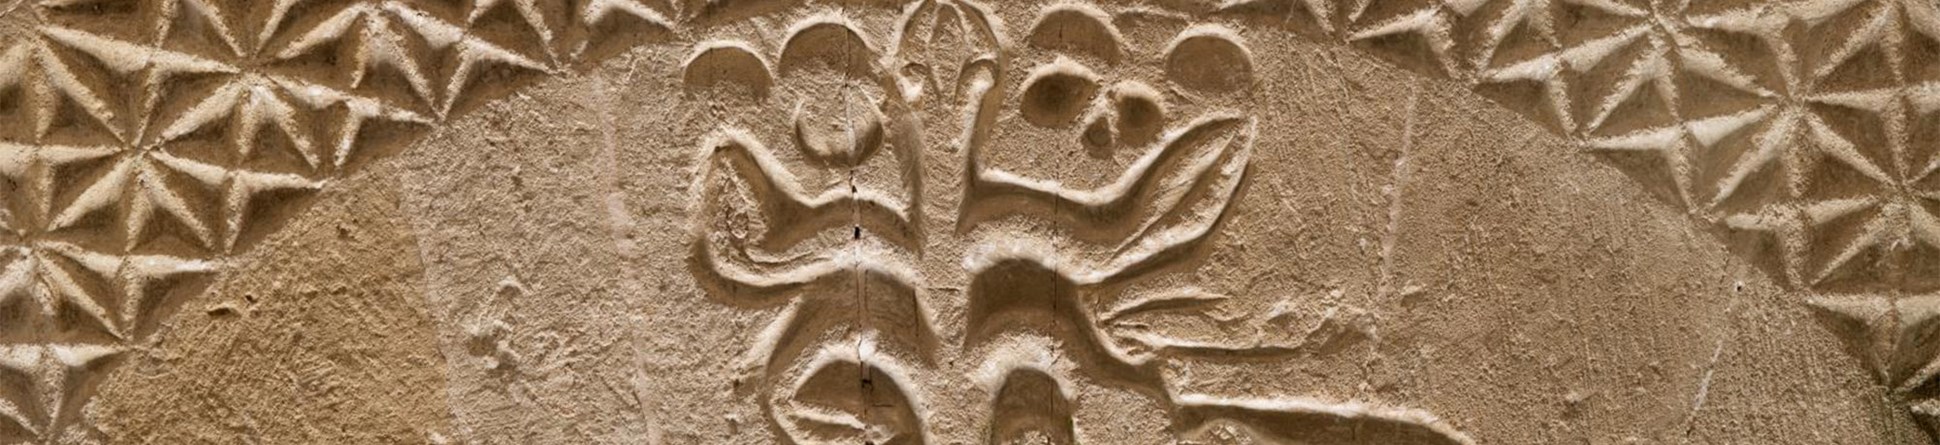 Detail of tympanum showing tree of life